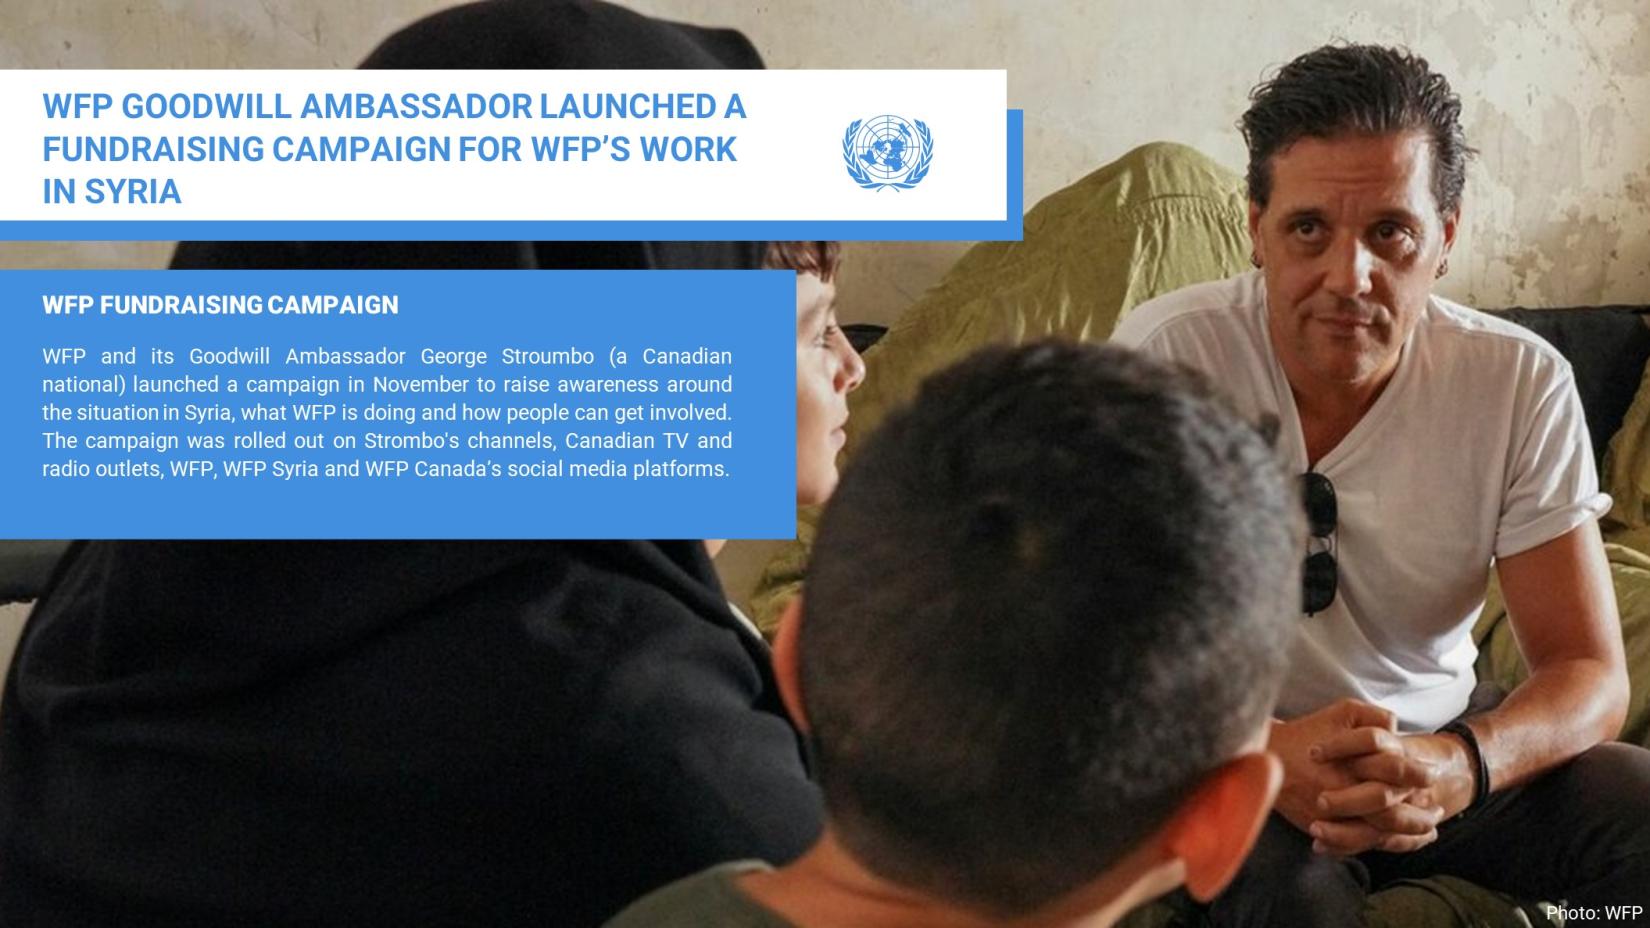 WFP GOODWILL AMBASSADOR LAUNCHED A FUNDRAISING CAMPAIGN FOR WFP’S WORK IN SYRIA